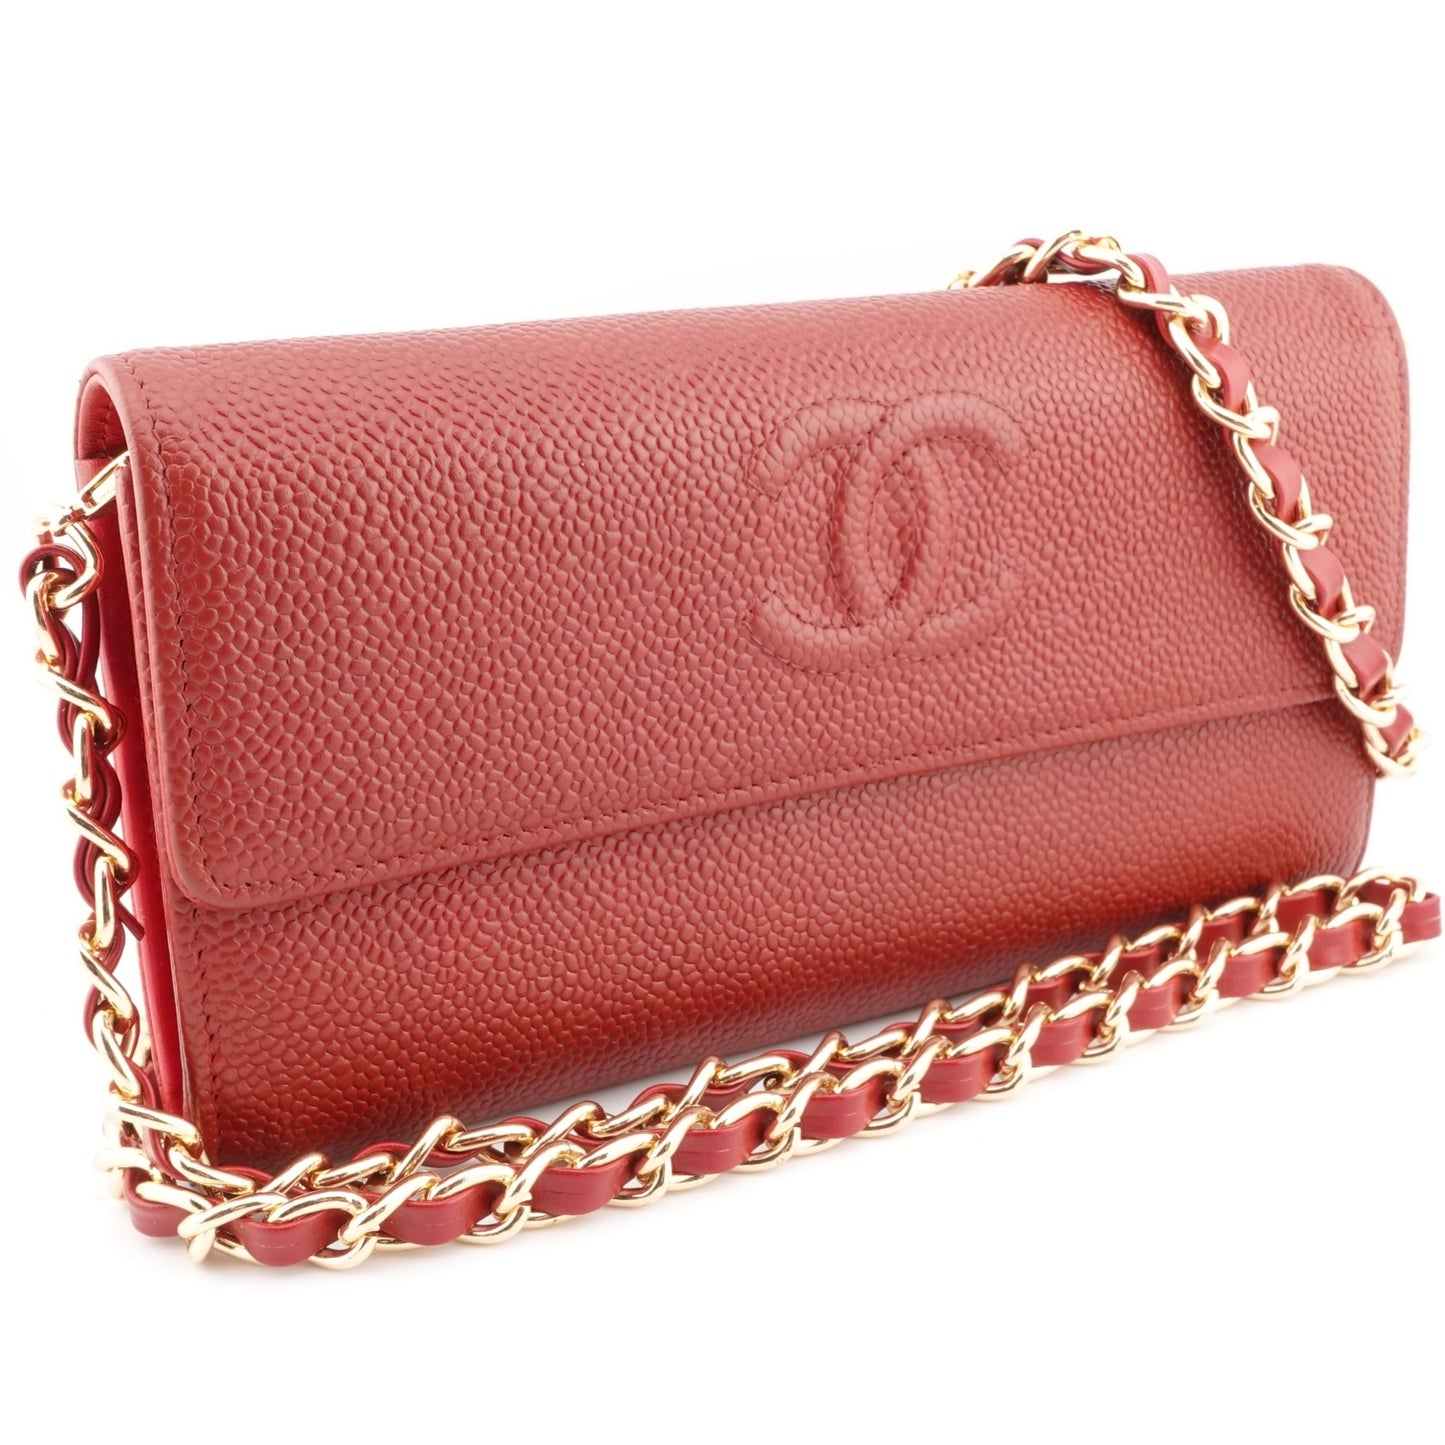 CHANEL Caviar Timeless Long Flap Wallet On Chain - Bag Envy